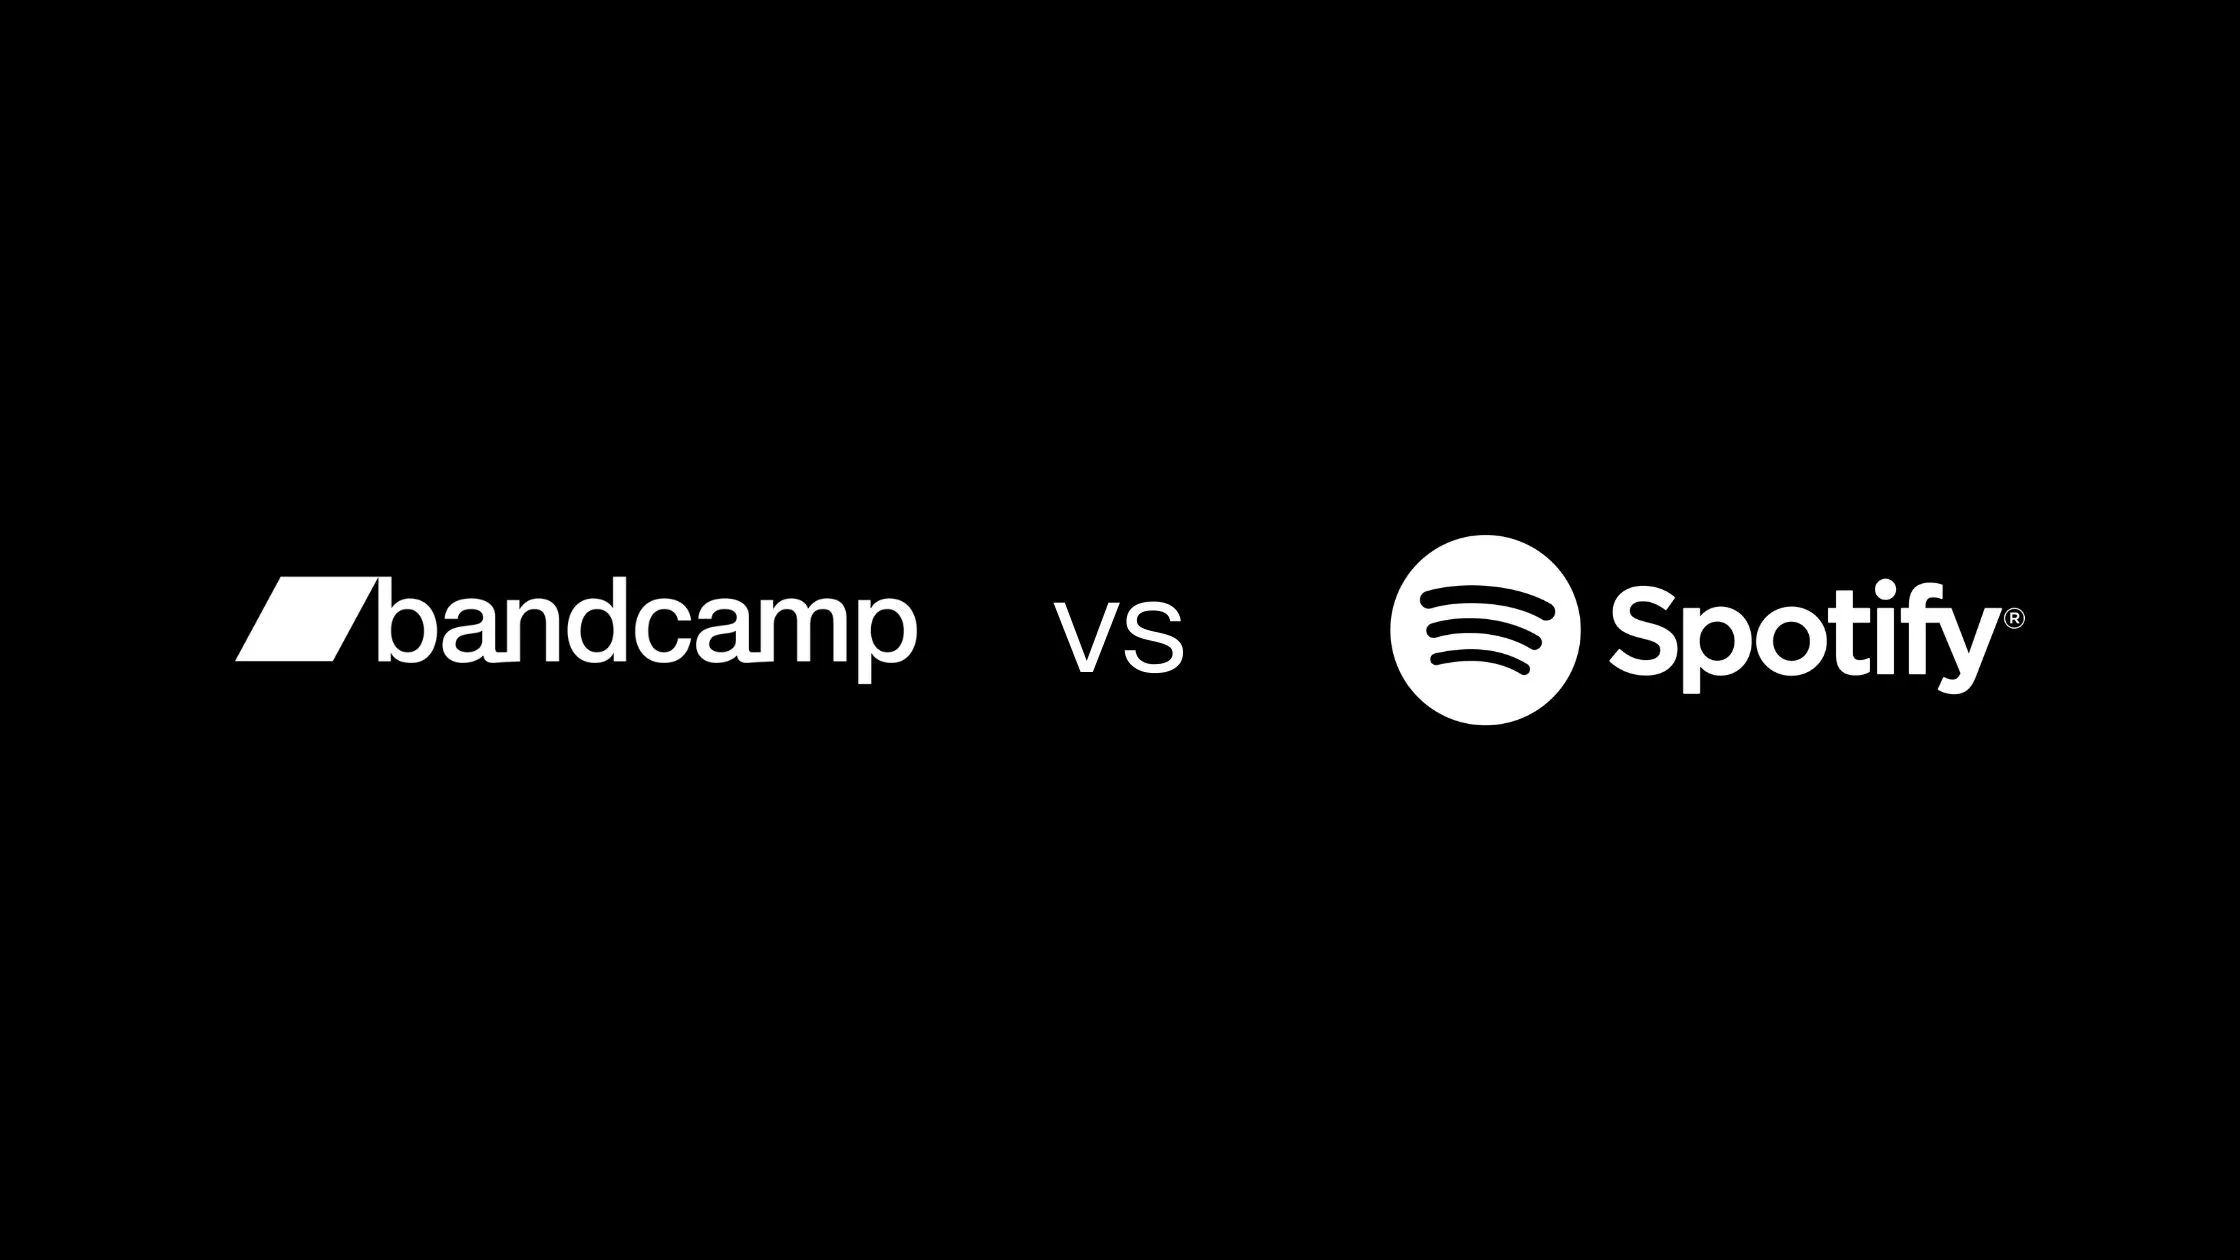 Bandcamp Vs Spotify: Which Tool Should You Use?